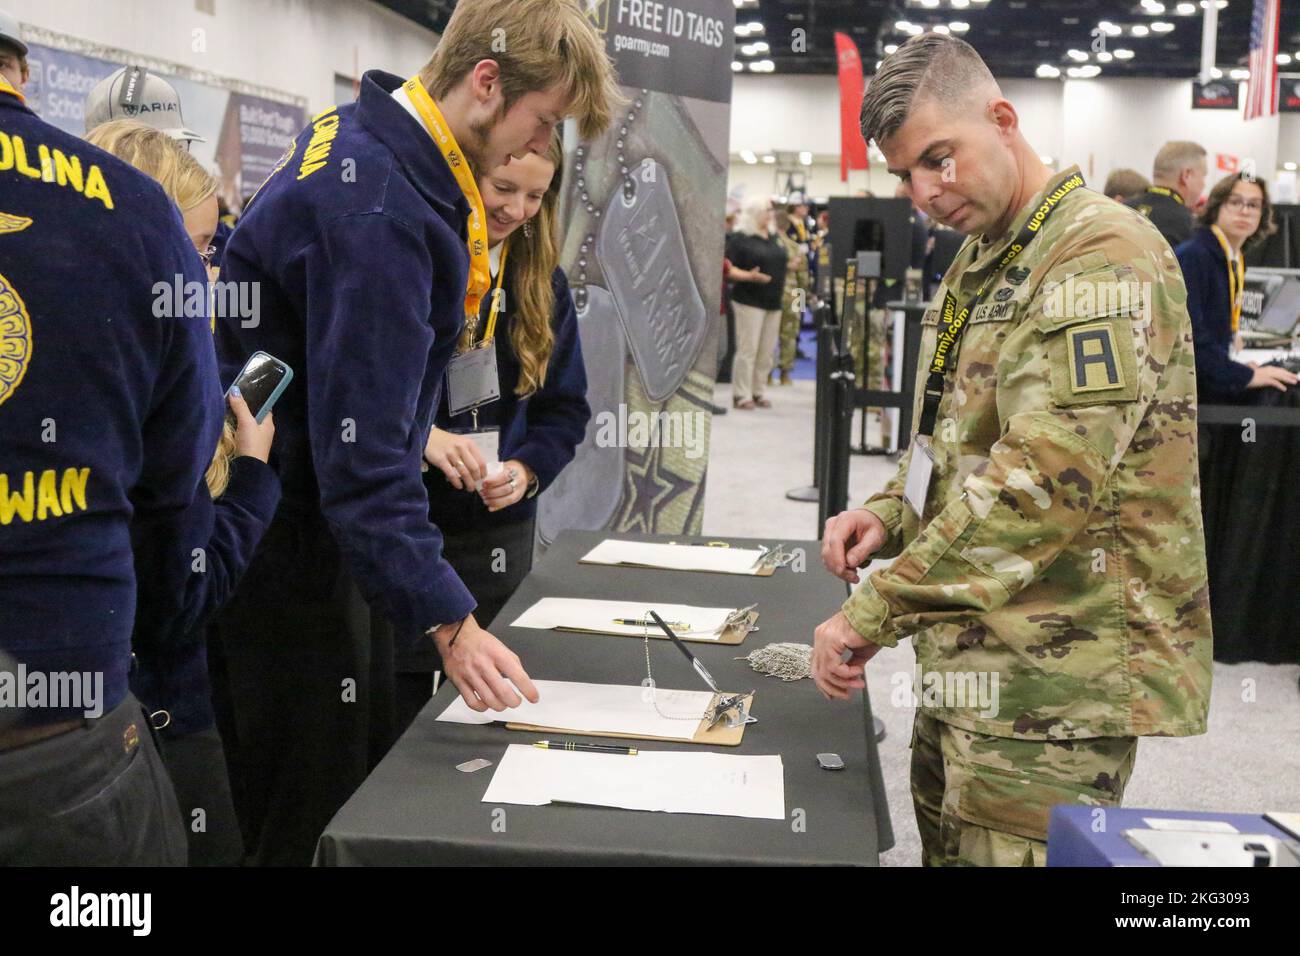 U.S. Army Sgt. 1st Class Justin Shultz, an observer coach/trainer assigned to 157th Infantry Brigade, First Army Division East, creates personalized military dog tags for a student during the 95th Annual Future Farmers of America Expo at the Indianapolis Convention Center, Indianapolis, IN Oct 26, 2022.157th Infantry Brigade represented the Army as the only active-duty unit in Indiana. Stock Photo